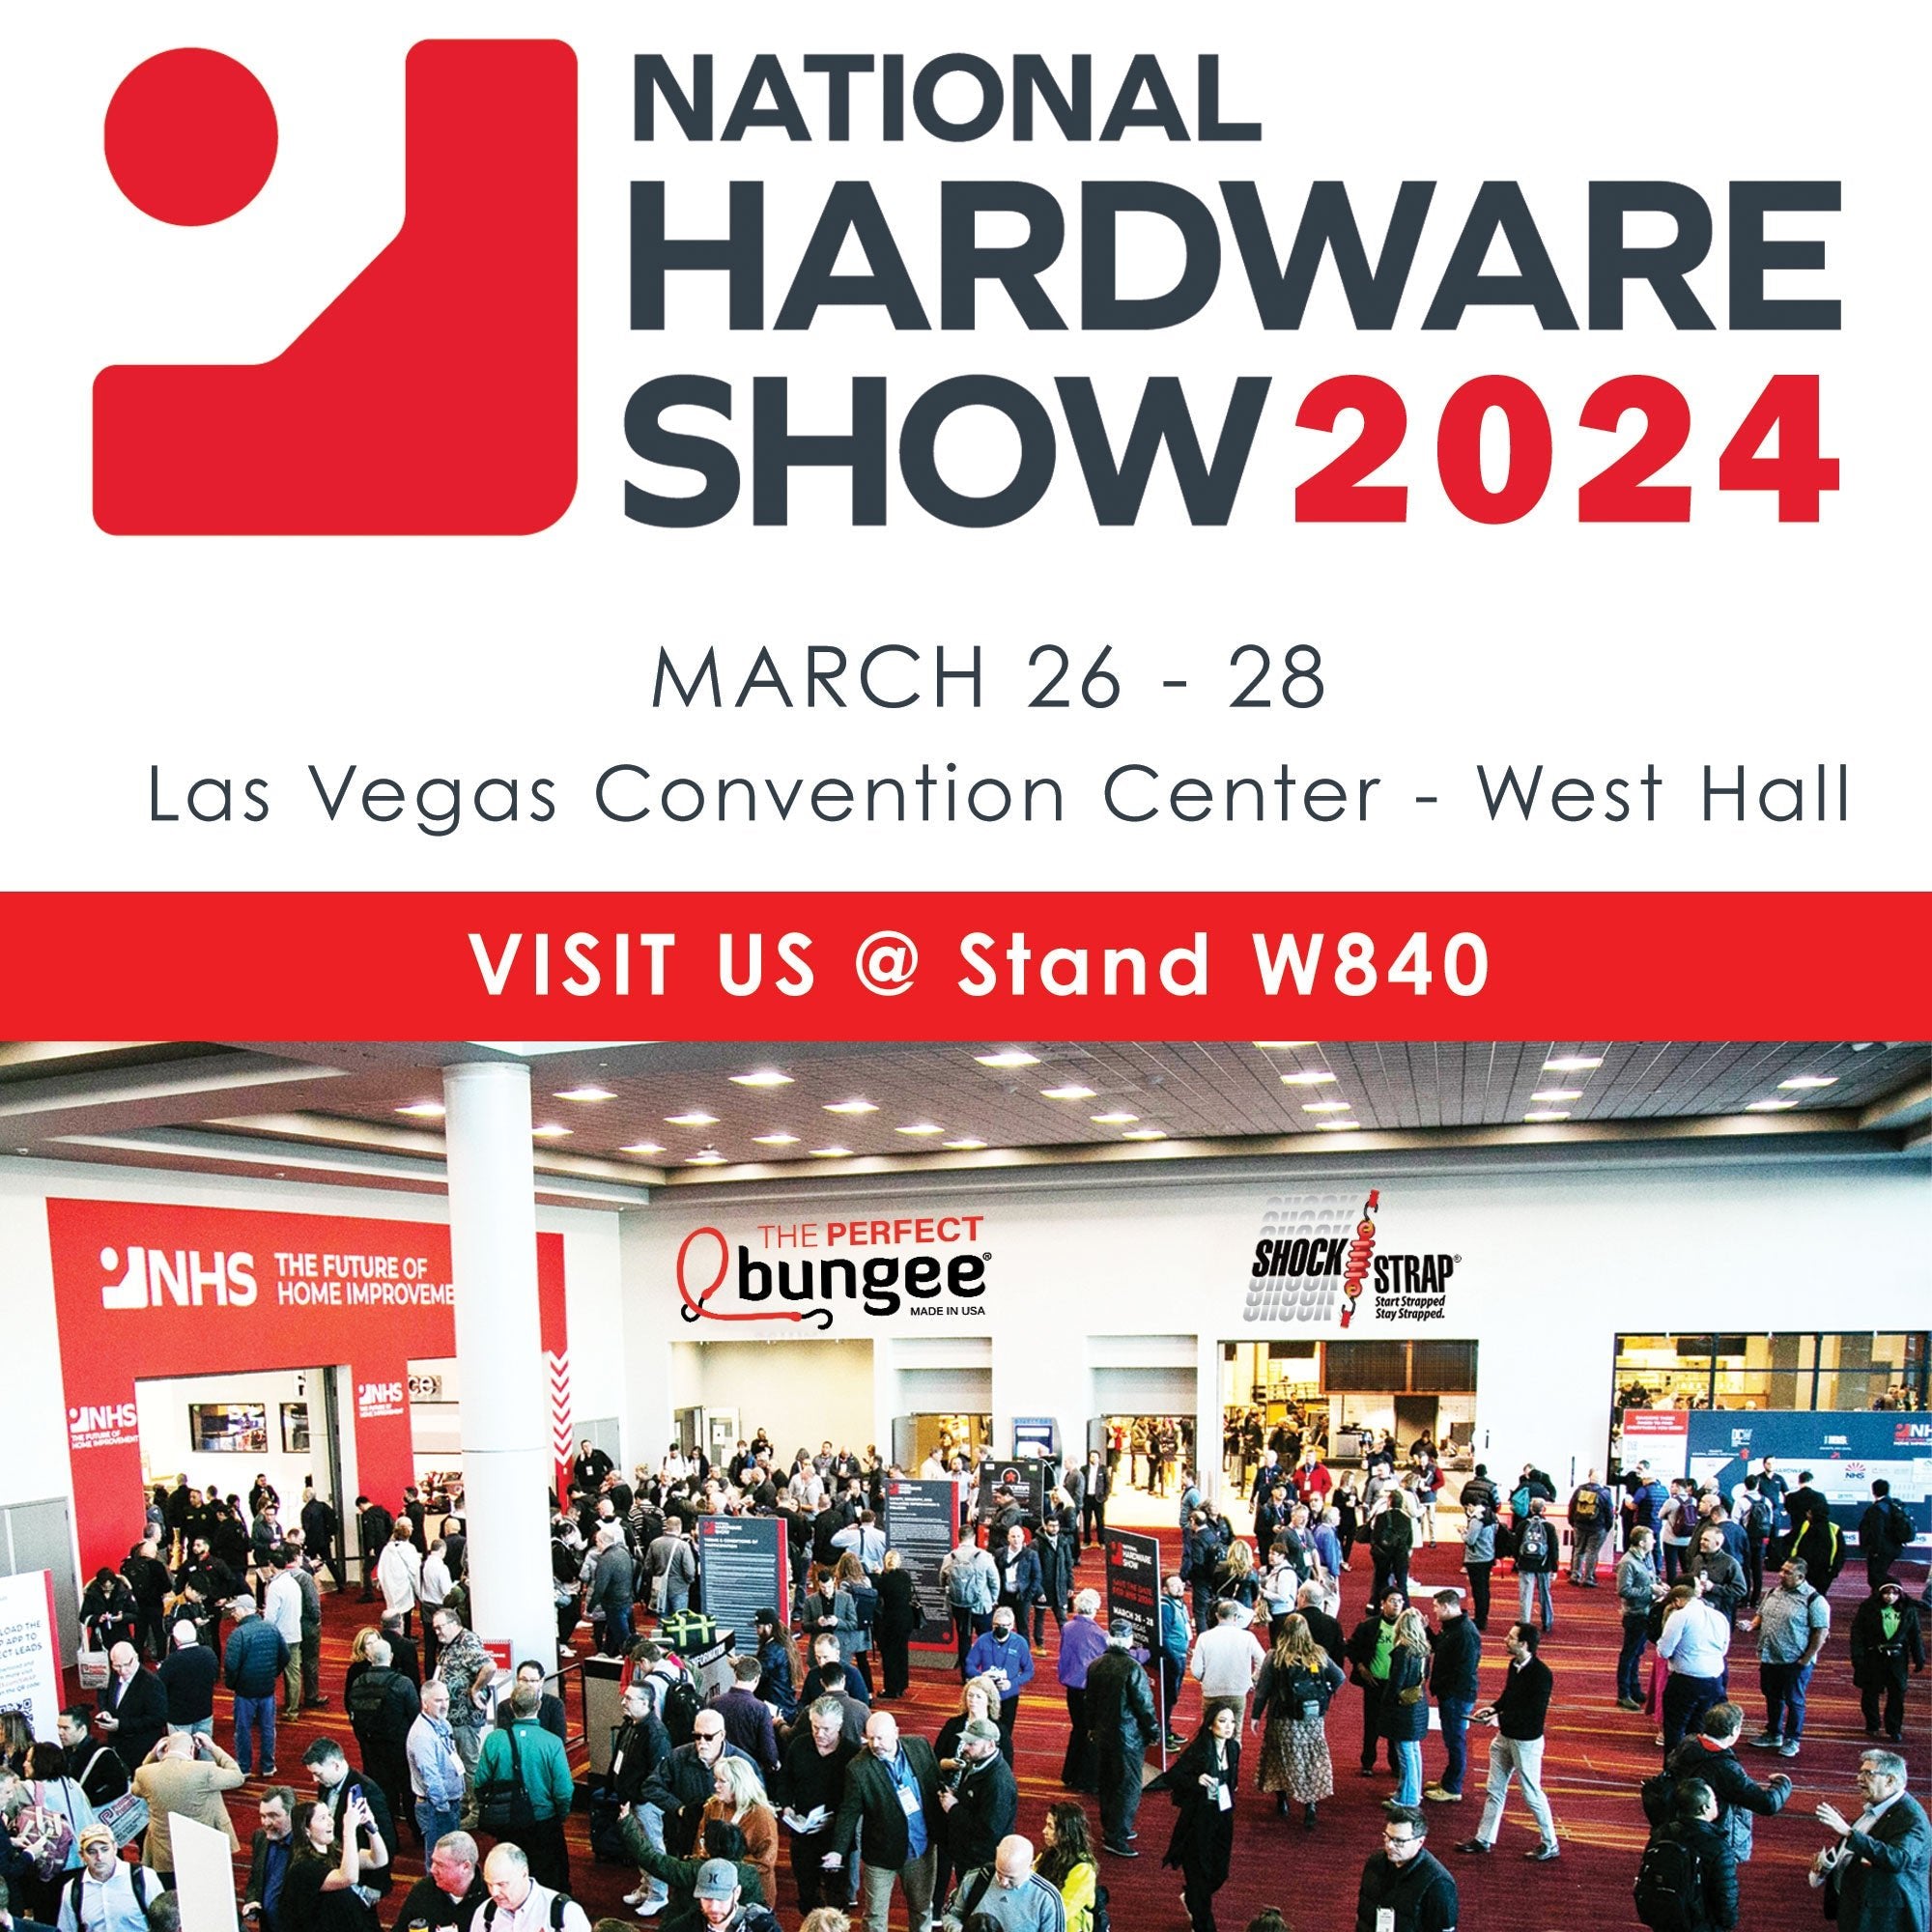 National Hardware Show 2024! - The Perfect Bungee & ShockStrap Tie Downs